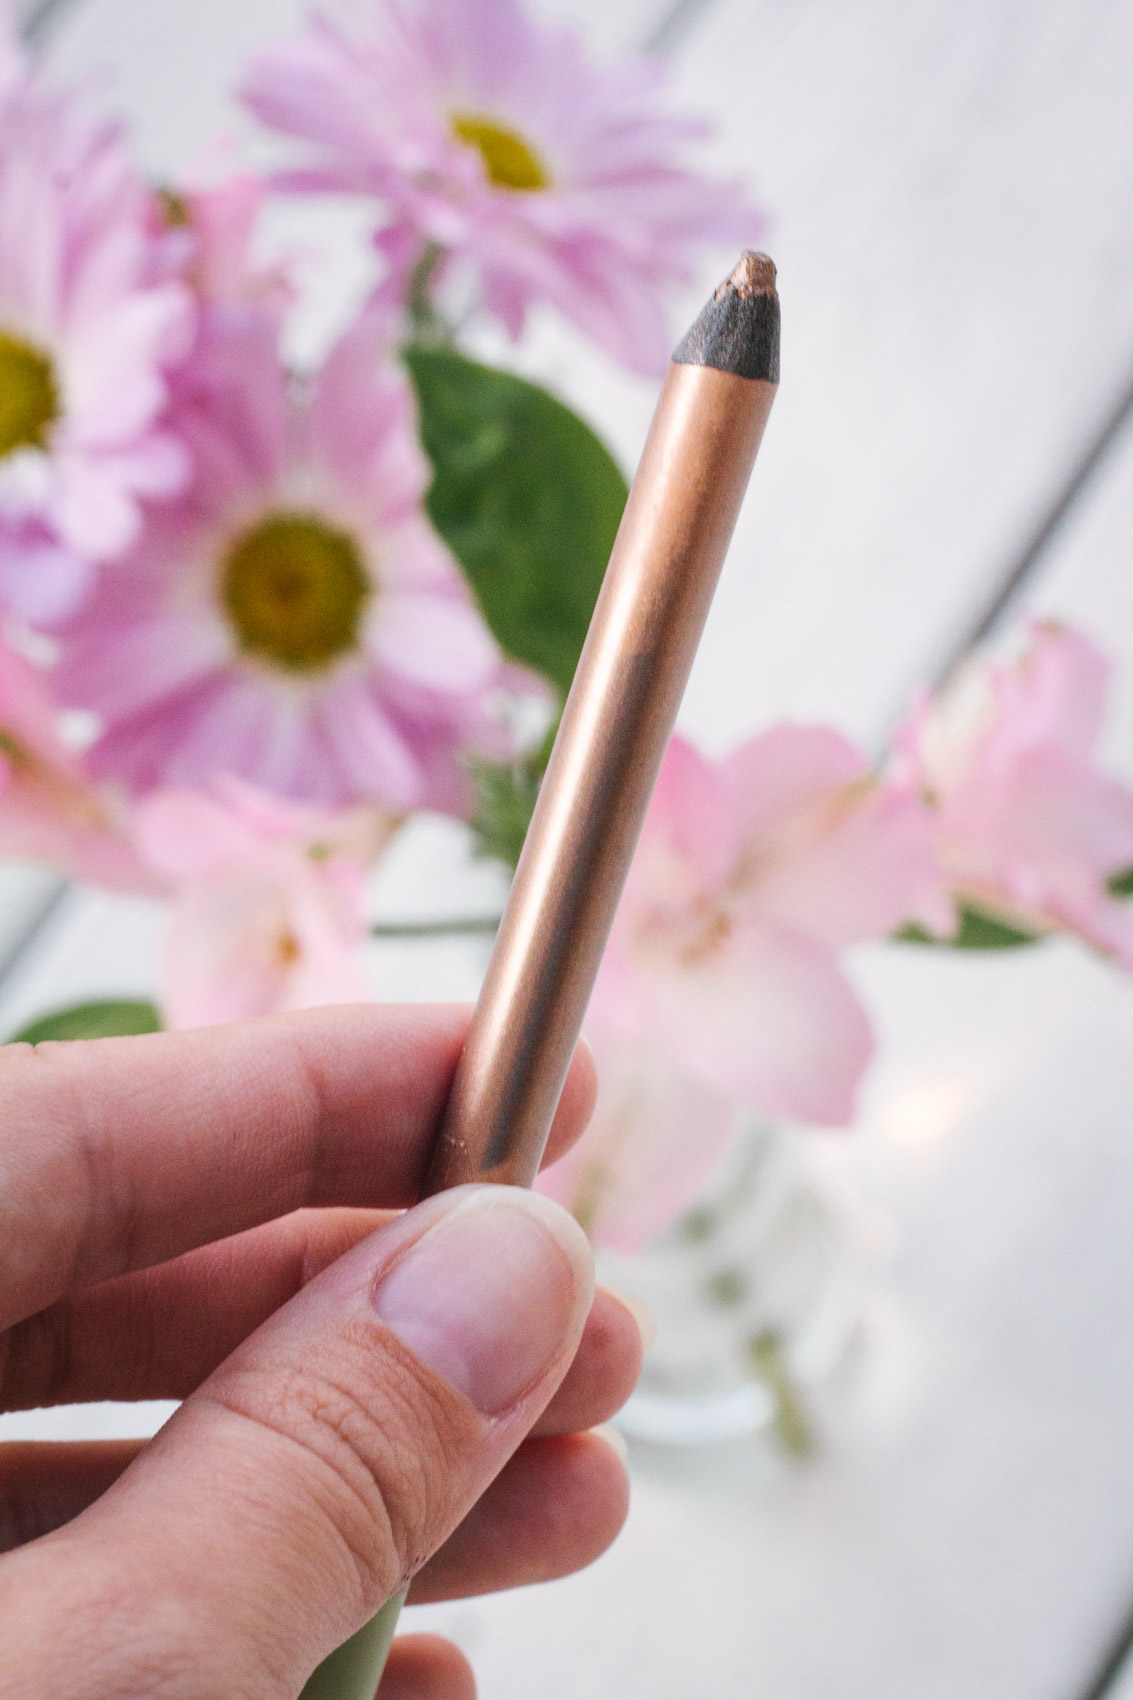 Pixi's Unless Silky Eye Pen in RoseGlow - For the gal who's in to eyeliner but wants to live without the harsh effects of dark colors. I love the soft, shimmery look this lines my eye with. It glides on so smooth and doesn't budge all day! 